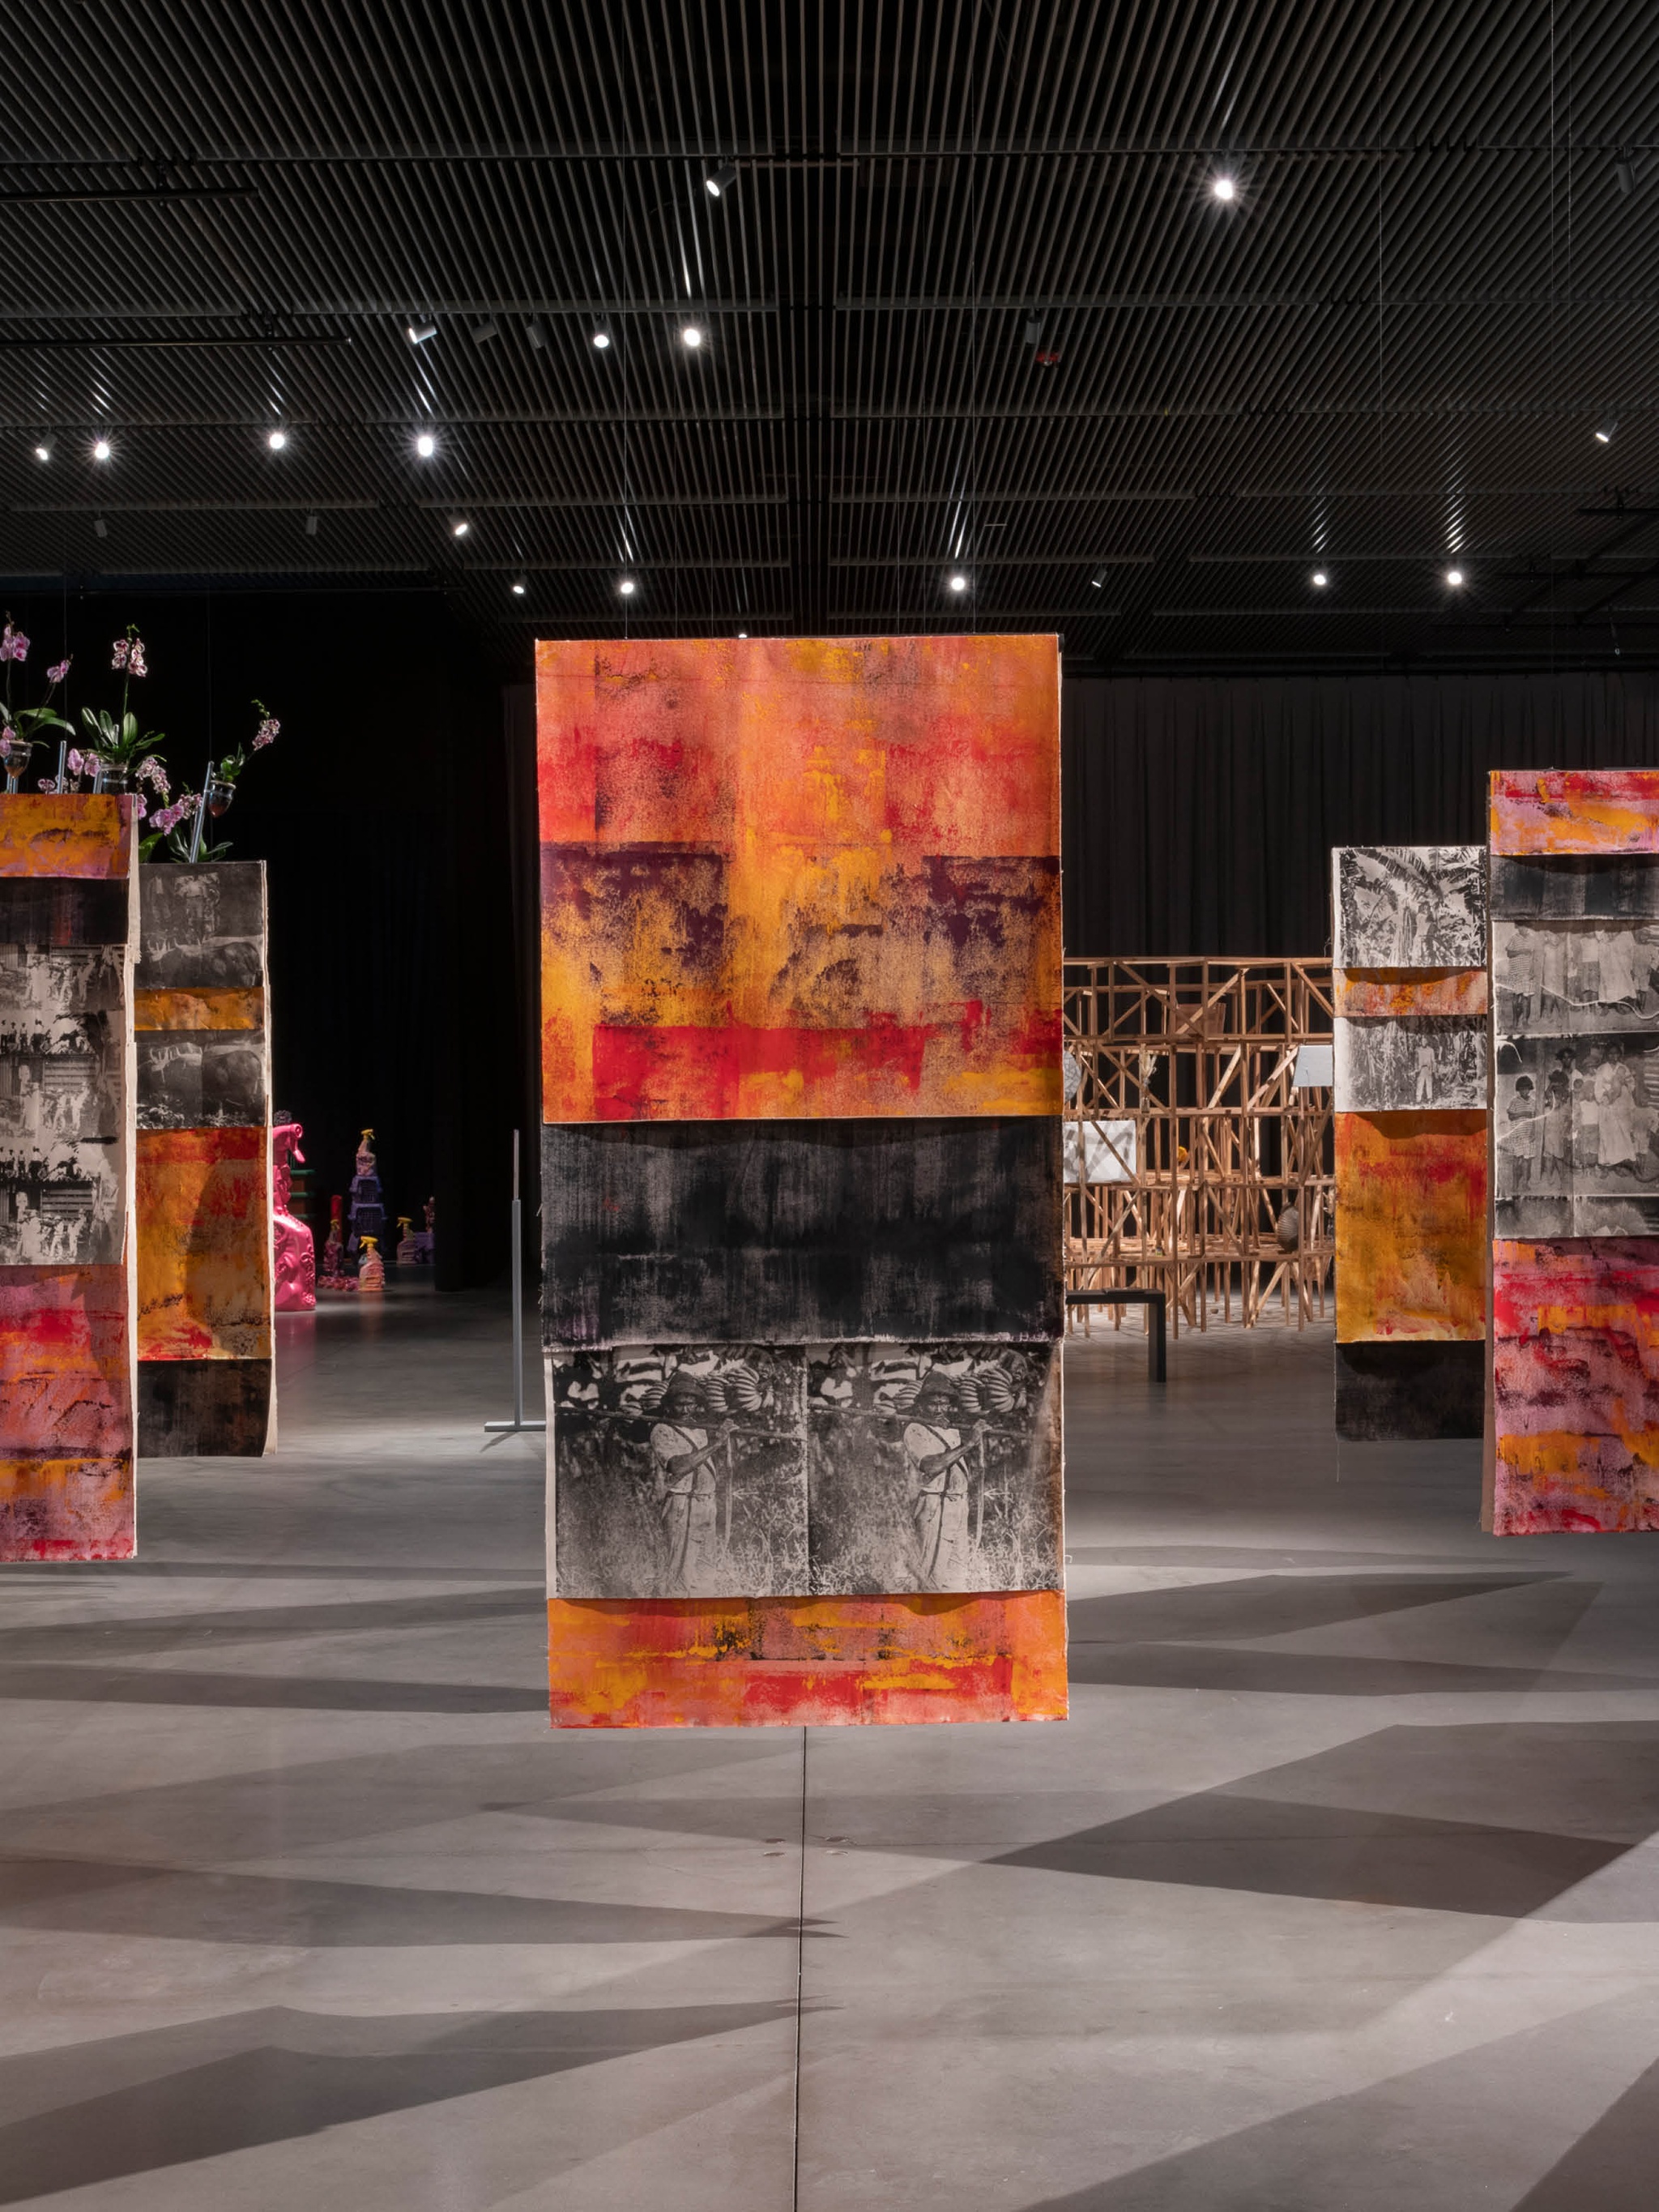 Nine painted fabric panels hang from a gallery ceiling in a three by three grid. The panels are painted in orange and black bands, with screen printed sections with black and white images of banana plantation workers in the 1920s. 